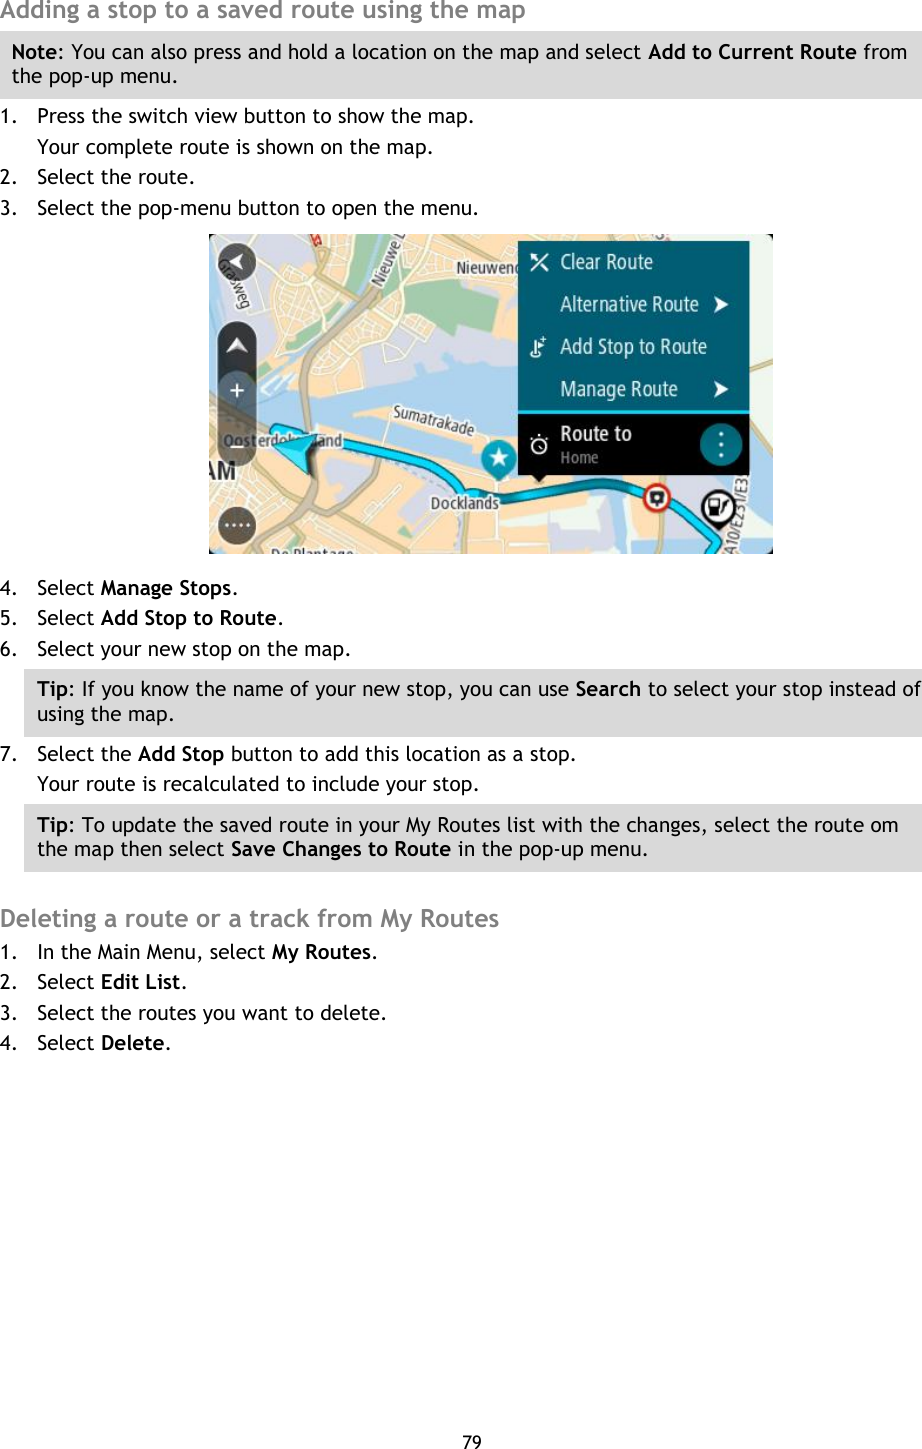 79    Adding a stop to a saved route using the map Note: You can also press and hold a location on the map and select Add to Current Route from the pop-up menu. 1. Press the switch view button to show the map. Your complete route is shown on the map. 2. Select the route. 3. Select the pop-menu button to open the menu.  4. Select Manage Stops. 5. Select Add Stop to Route. 6. Select your new stop on the map. Tip: If you know the name of your new stop, you can use Search to select your stop instead of using the map. 7. Select the Add Stop button to add this location as a stop. Your route is recalculated to include your stop. Tip: To update the saved route in your My Routes list with the changes, select the route om the map then select Save Changes to Route in the pop-up menu.  Deleting a route or a track from My Routes 1. In the Main Menu, select My Routes. 2. Select Edit List. 3. Select the routes you want to delete. 4. Select Delete. 